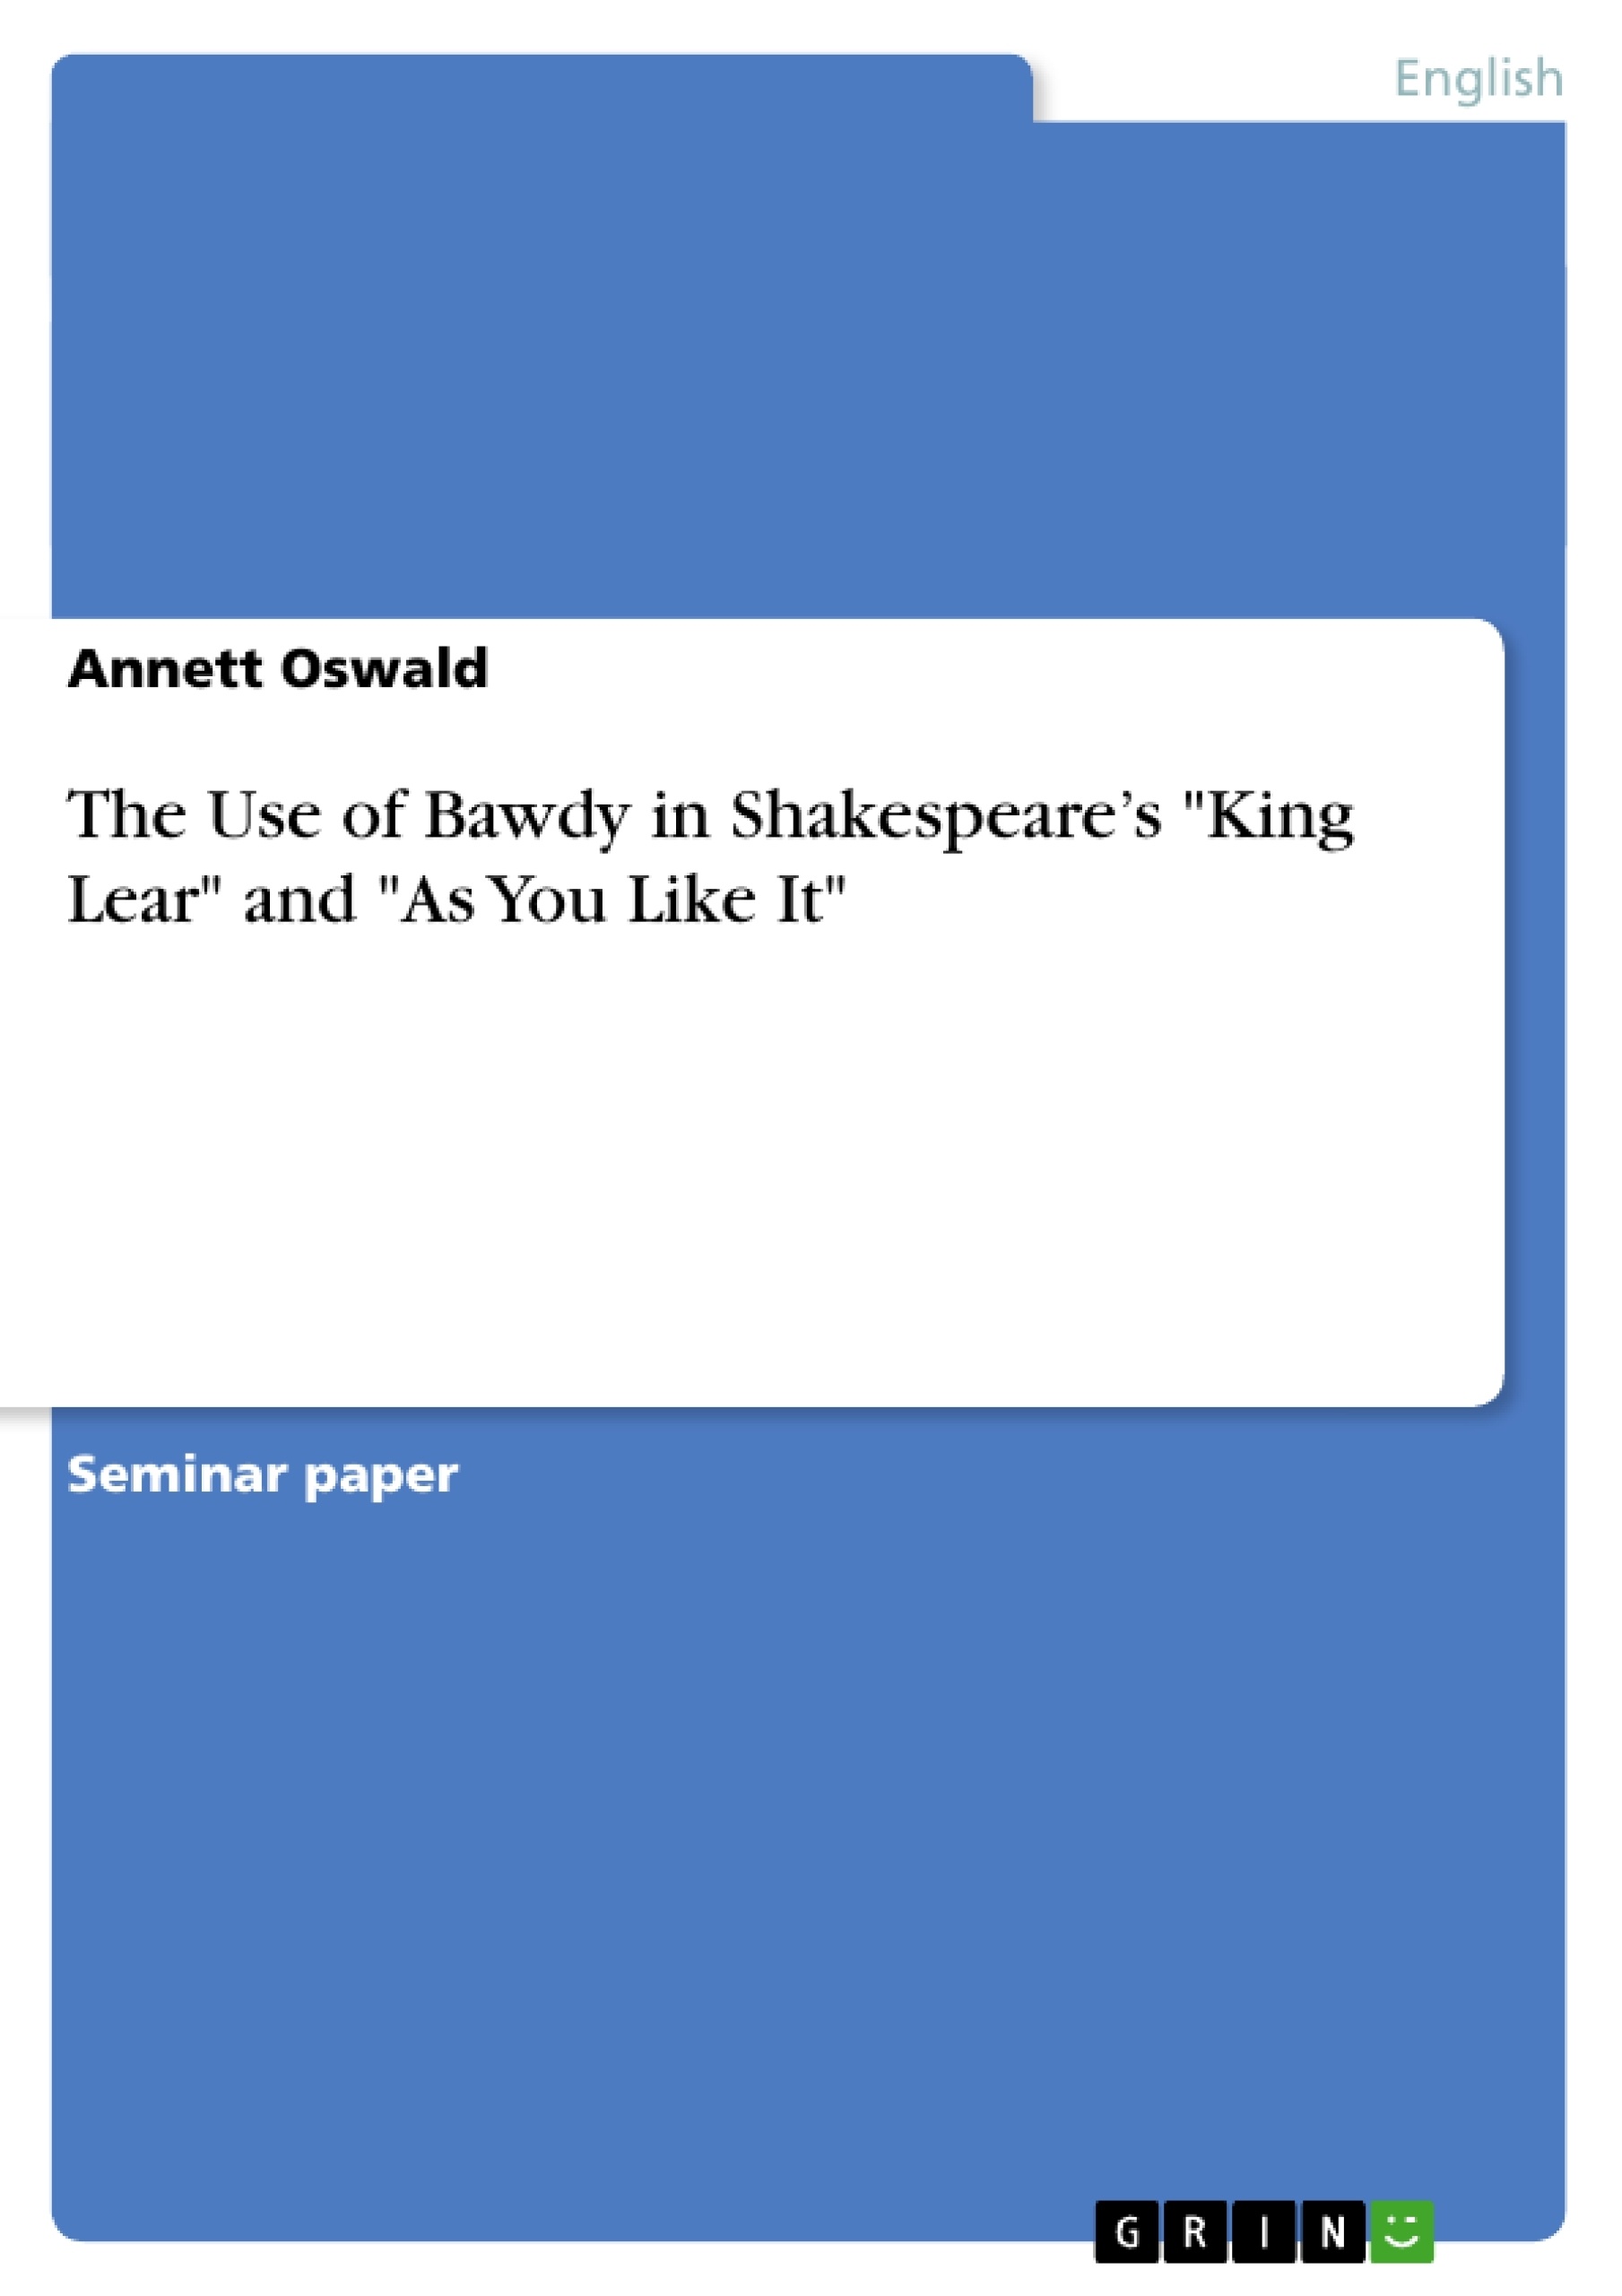 Title: The Use of Bawdy in Shakespeare’s "King Lear" and "As You Like It"